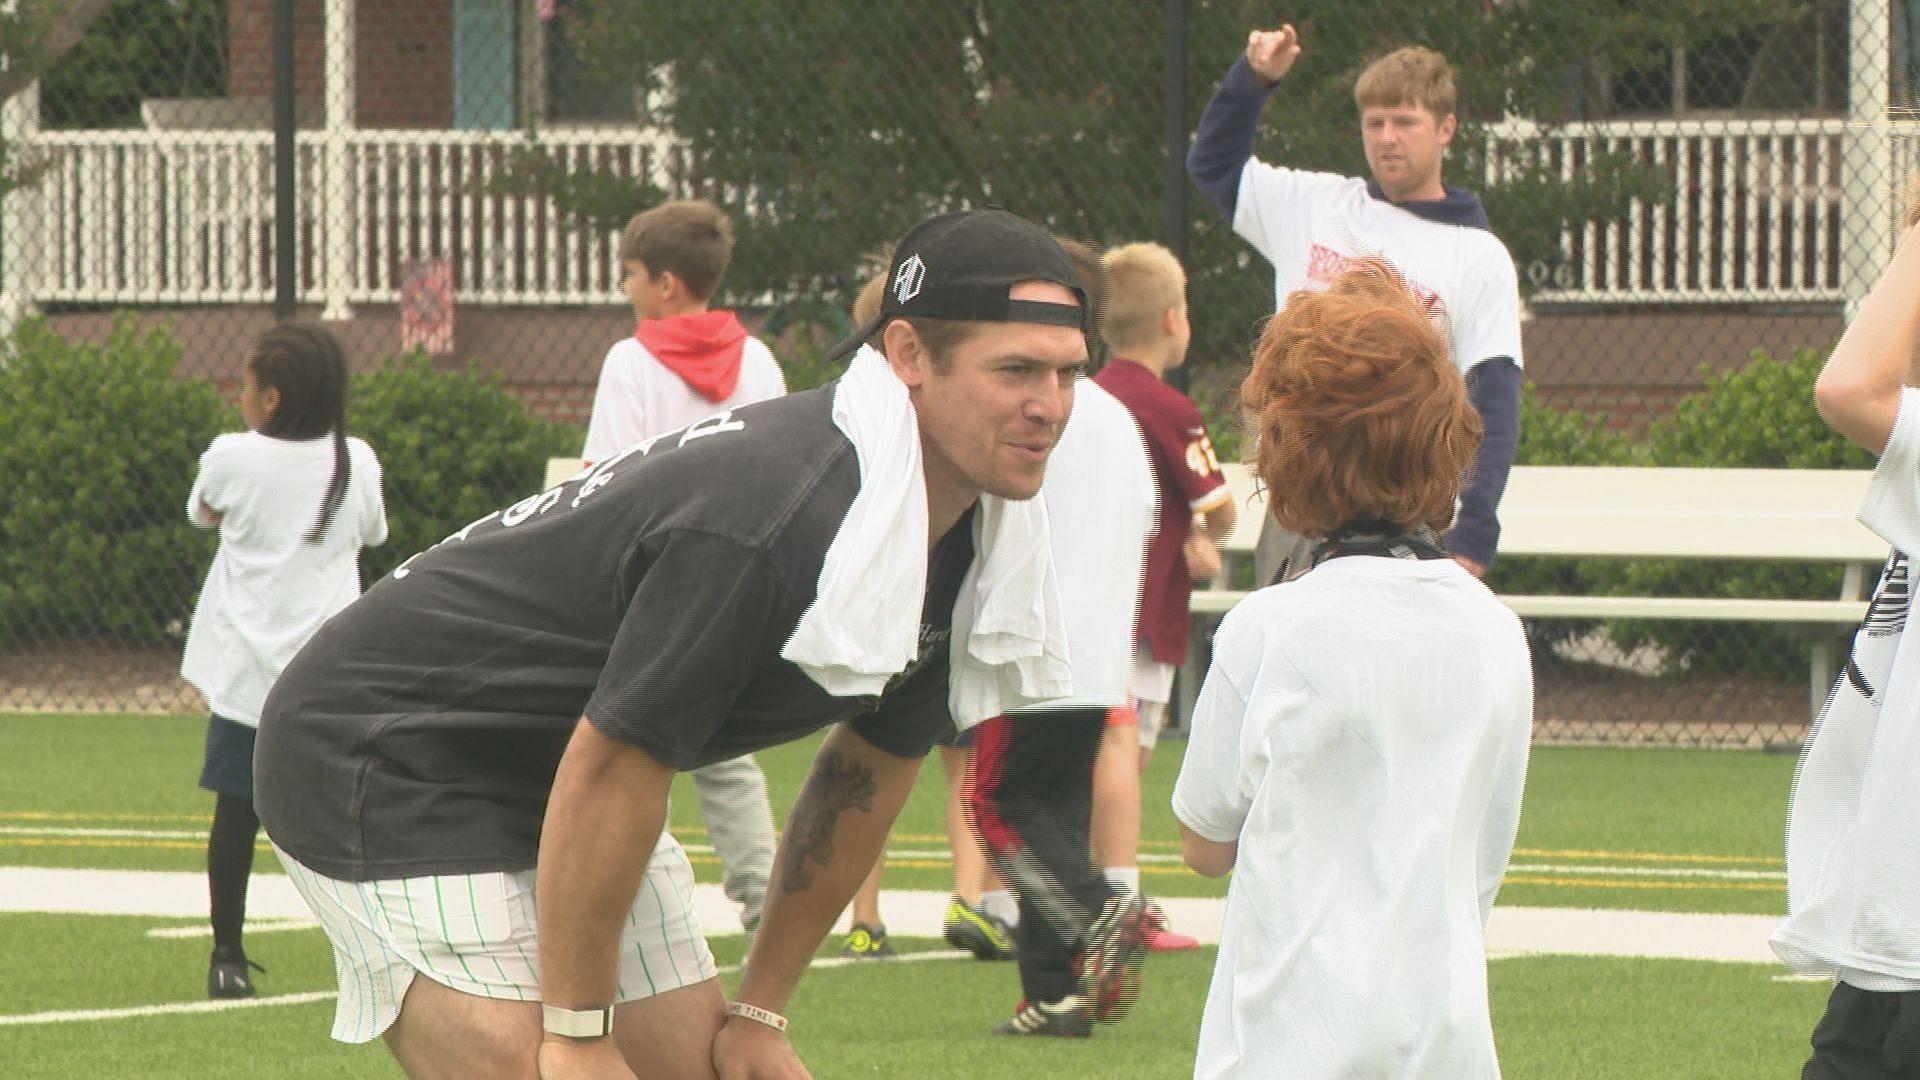 Taylor Heinicke's 9th annual youth football camp was a sold out event Saturday morning where he ran drills, signed autographs, and took pictures with local athletes.